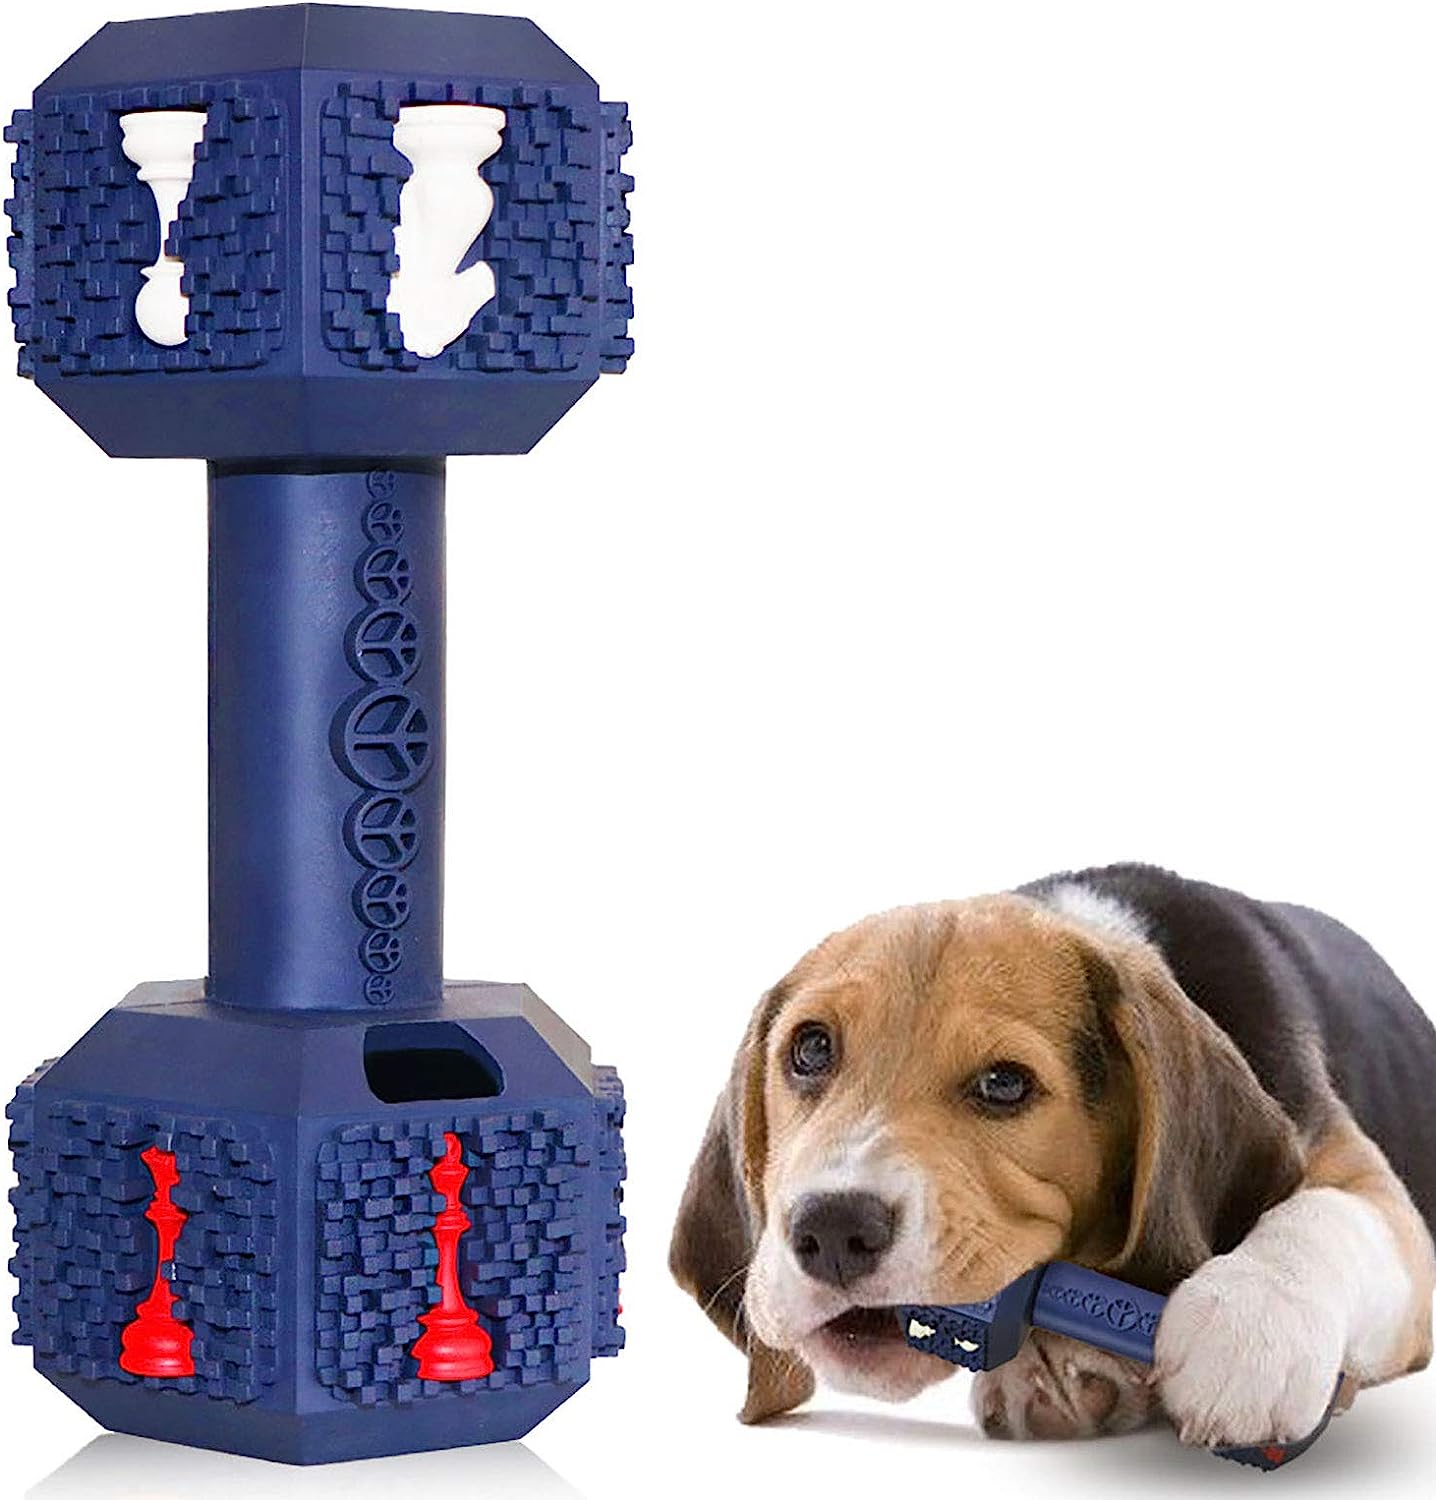 Chew Toys For Dogs for More Fun & Health – MightyChew